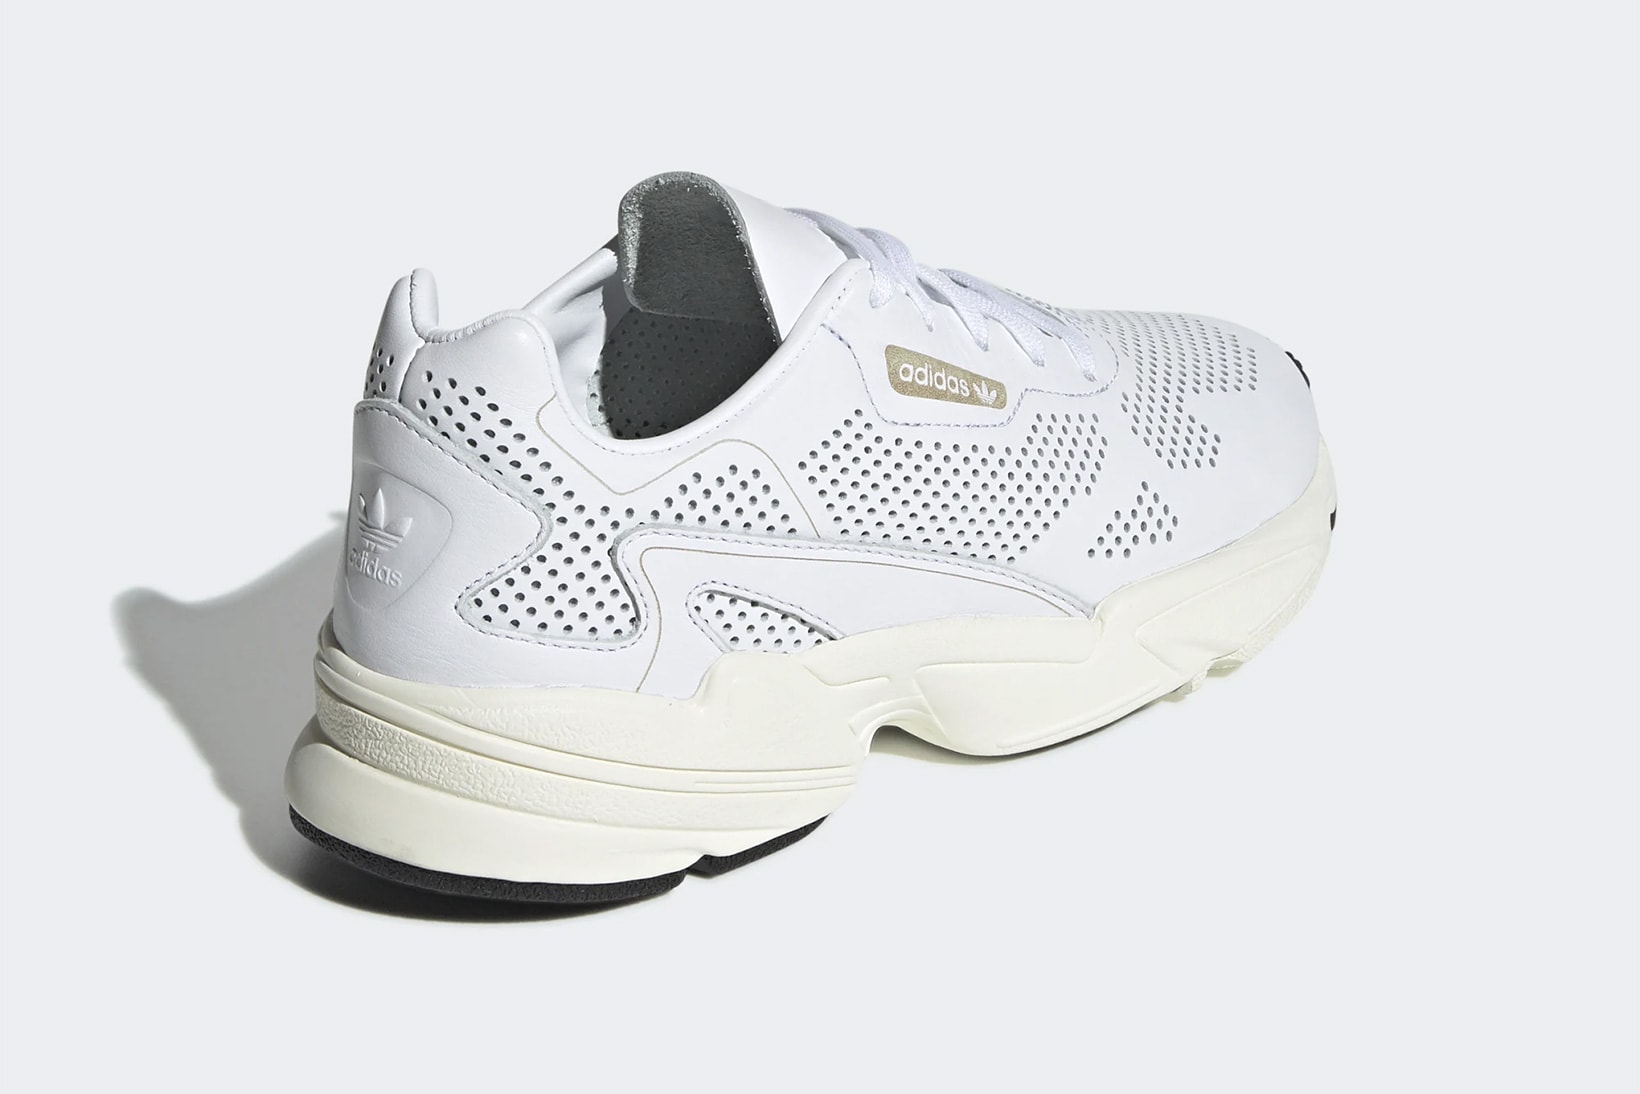 adidas falcon cloud white perforated upper details leather breathable sneaker spring